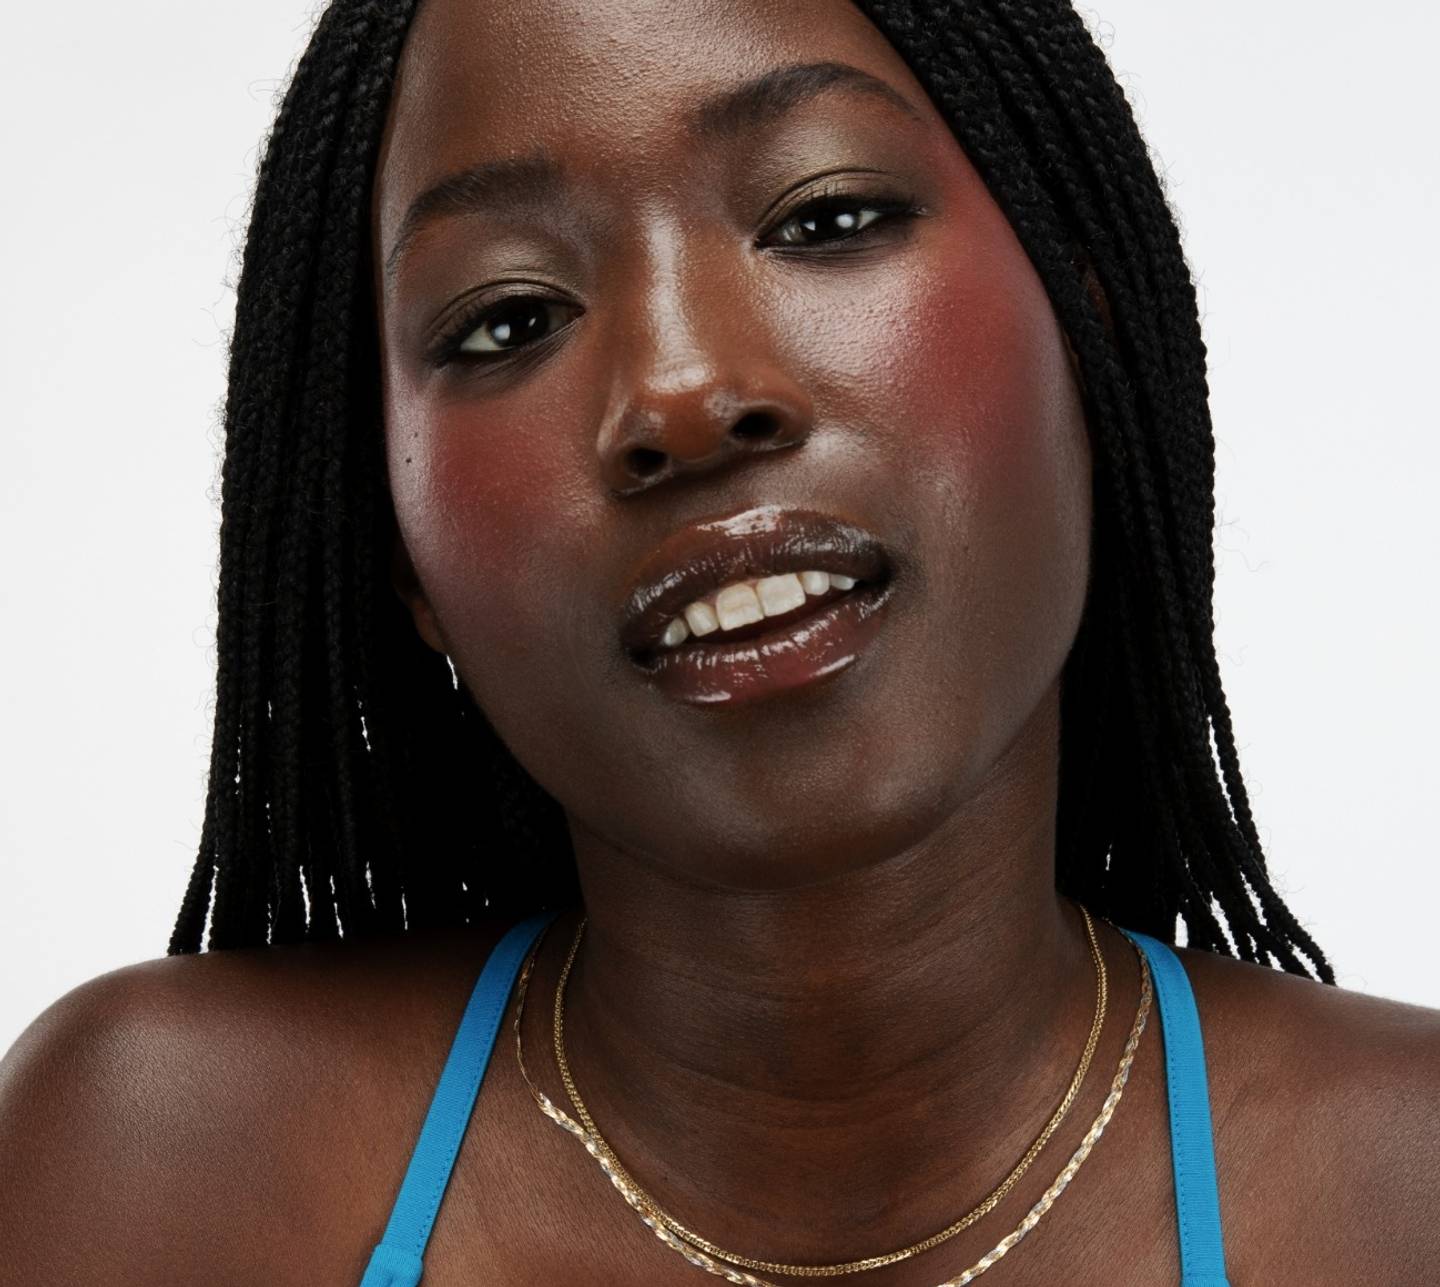 Portrait of a model with box braids wearing Milk Makeup Bionic Blush in Beyond on a white background.